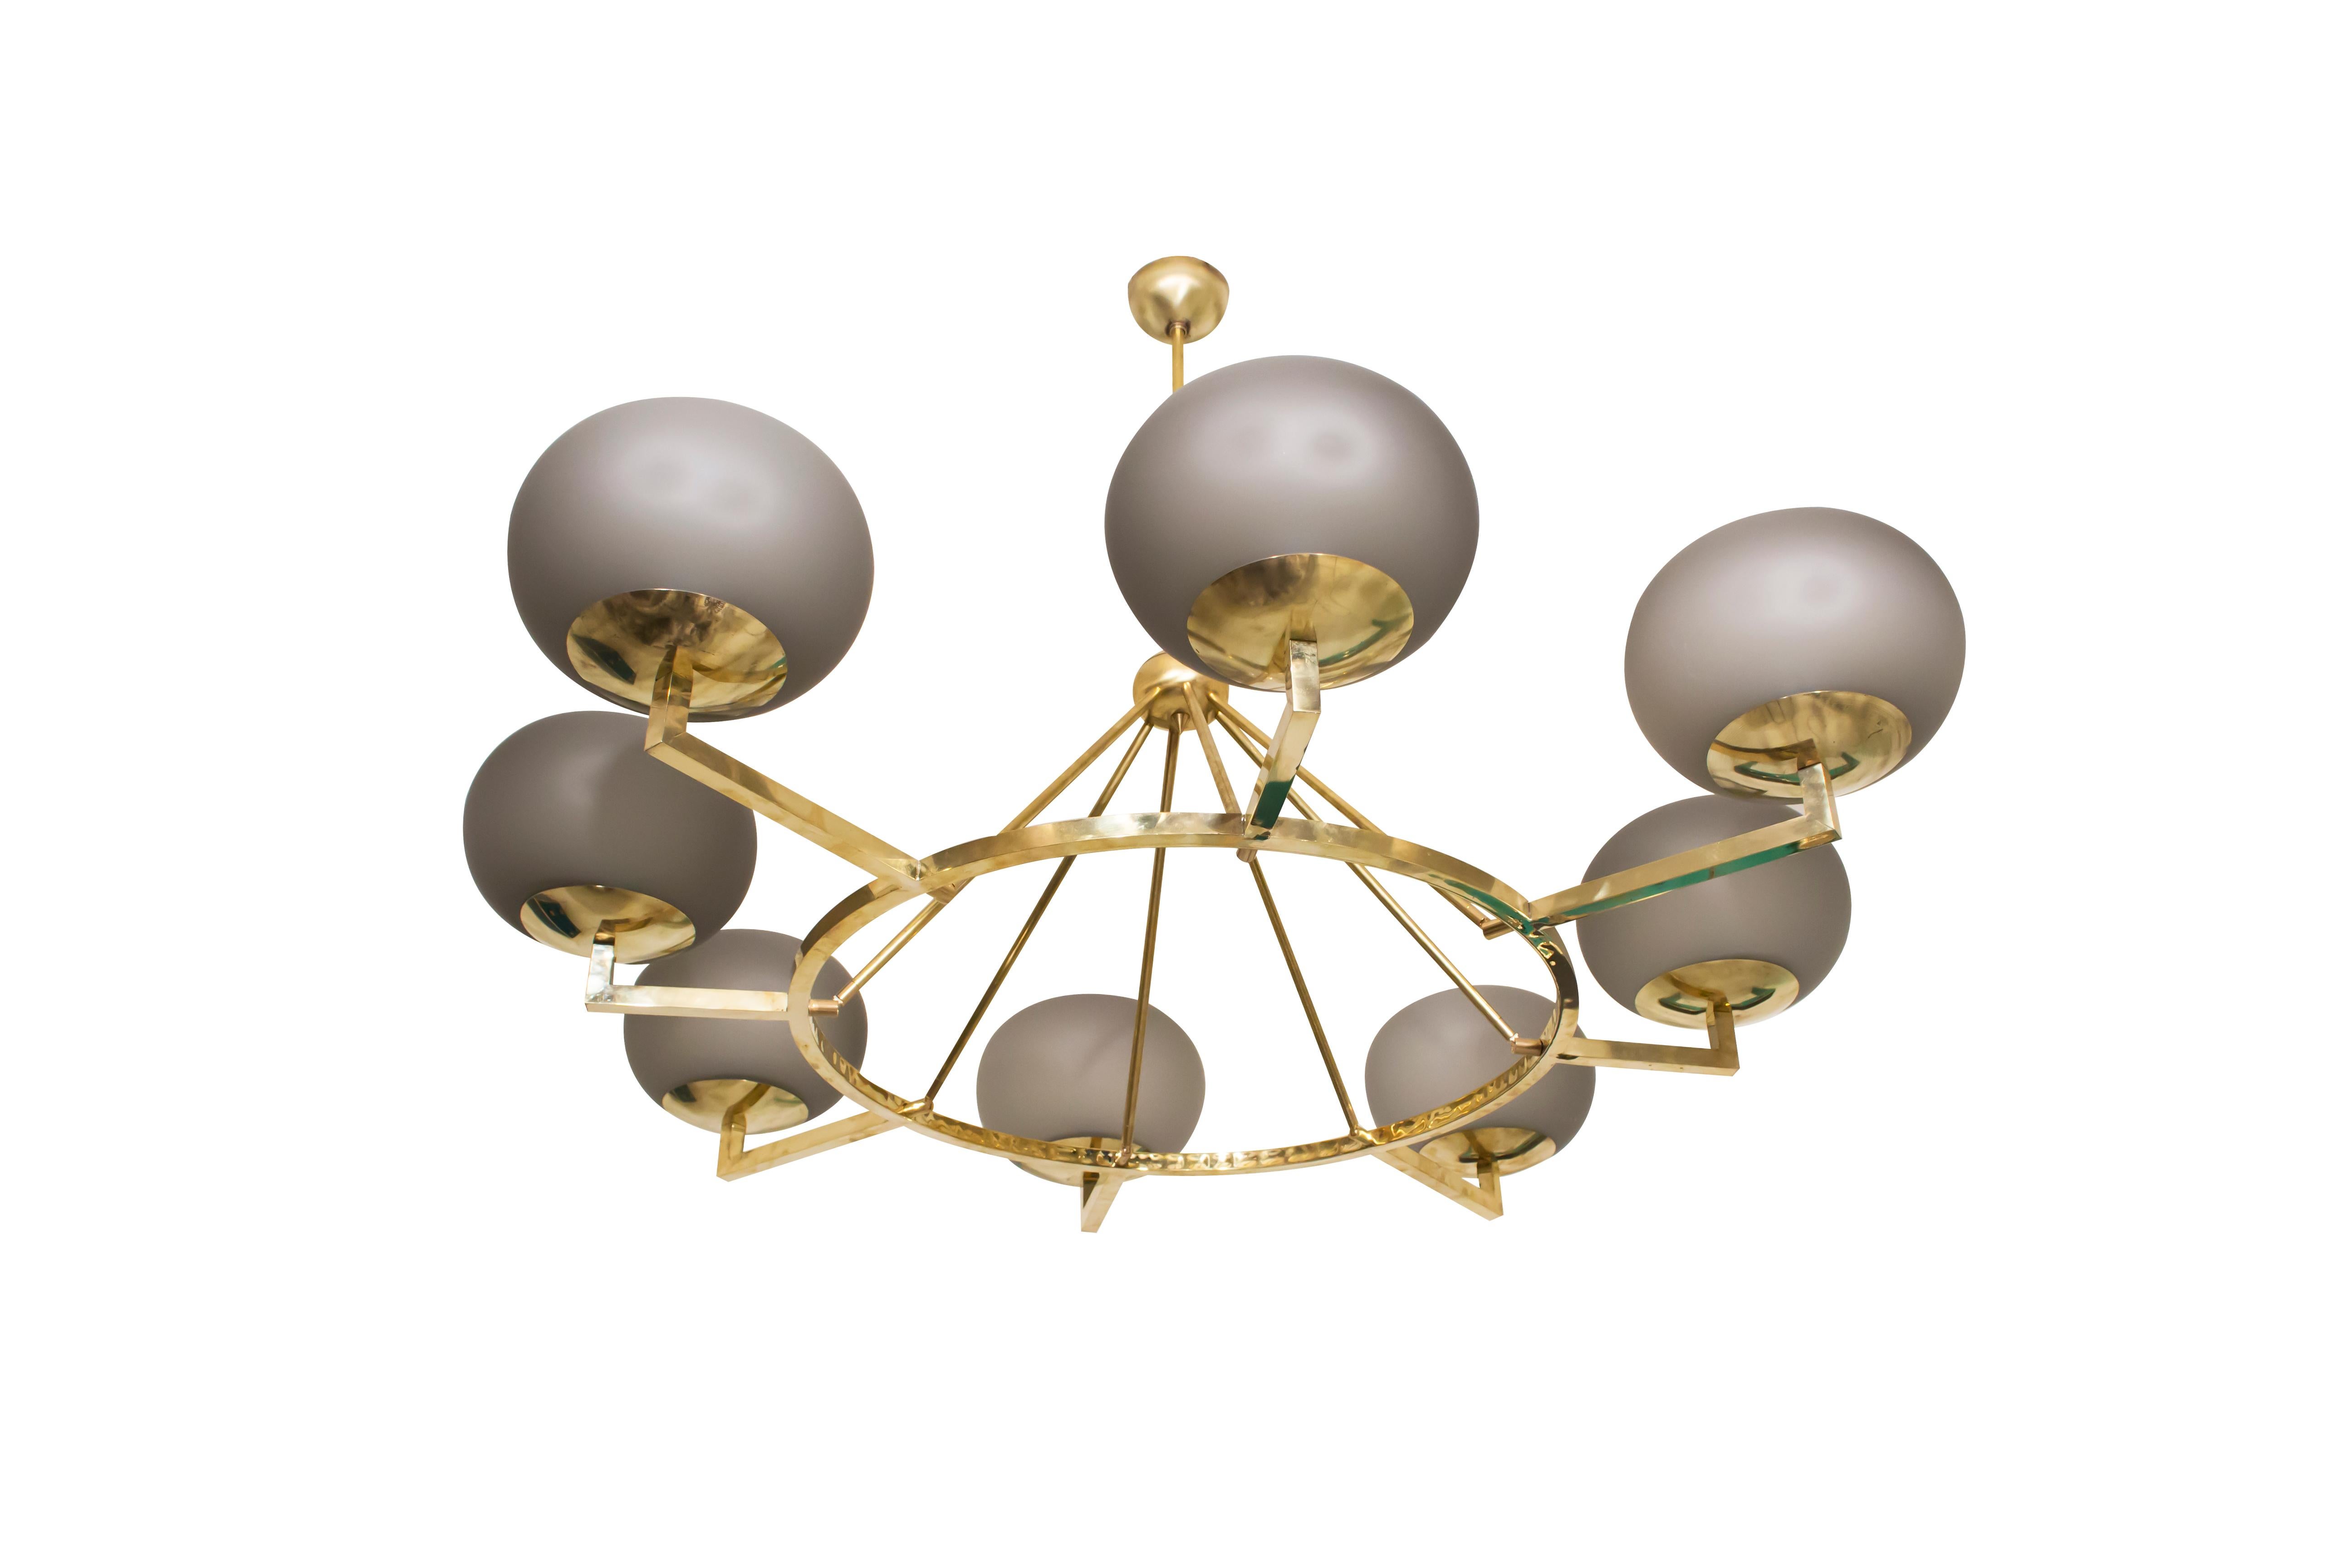 Brass chandelier
Grey glass shades
Made to order in Italy.